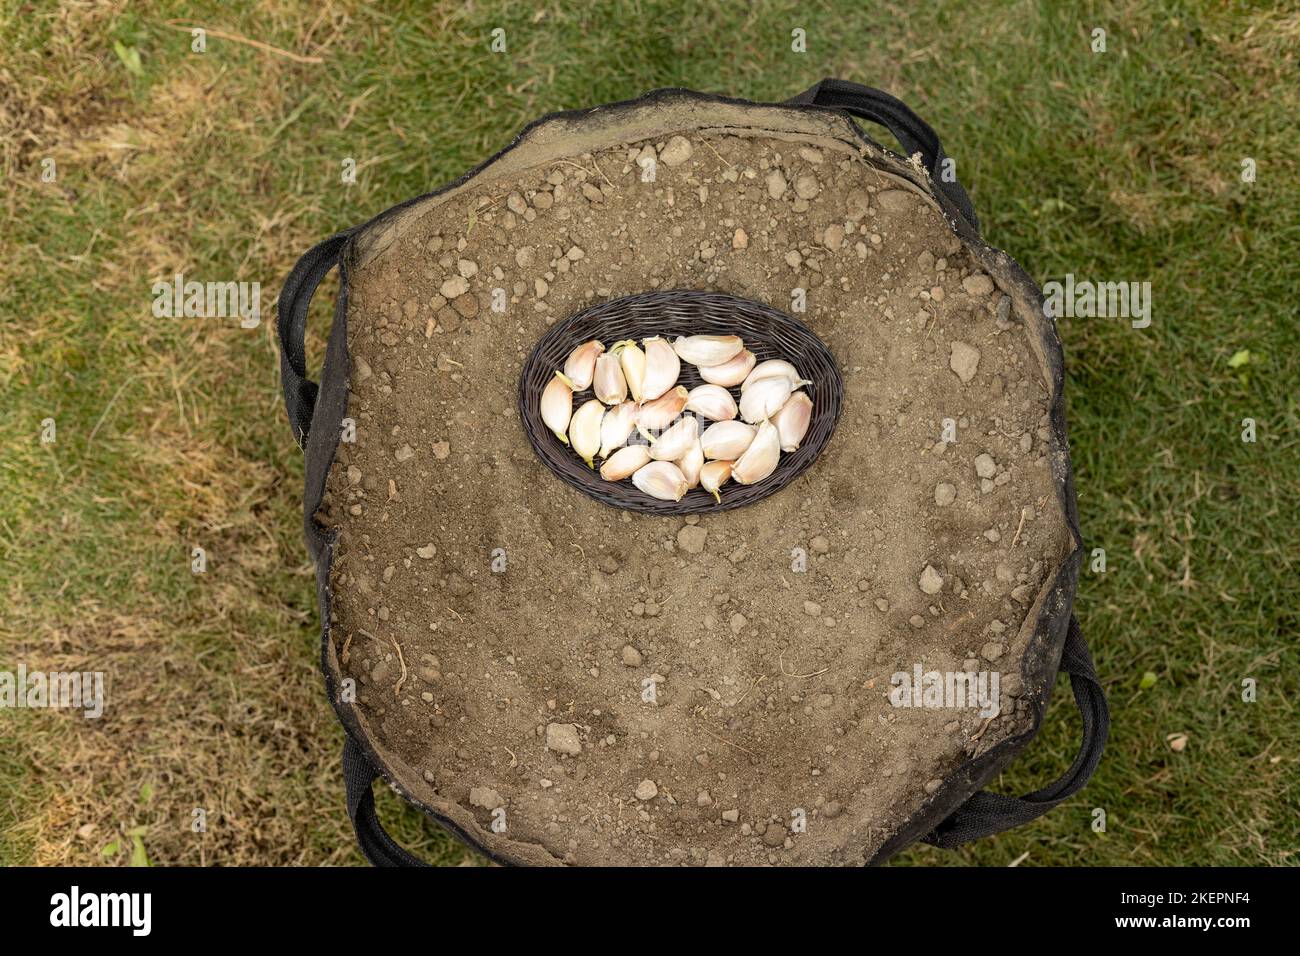 Garlic cloves loosen in a basket preparing to sow in a soil Stock Photo